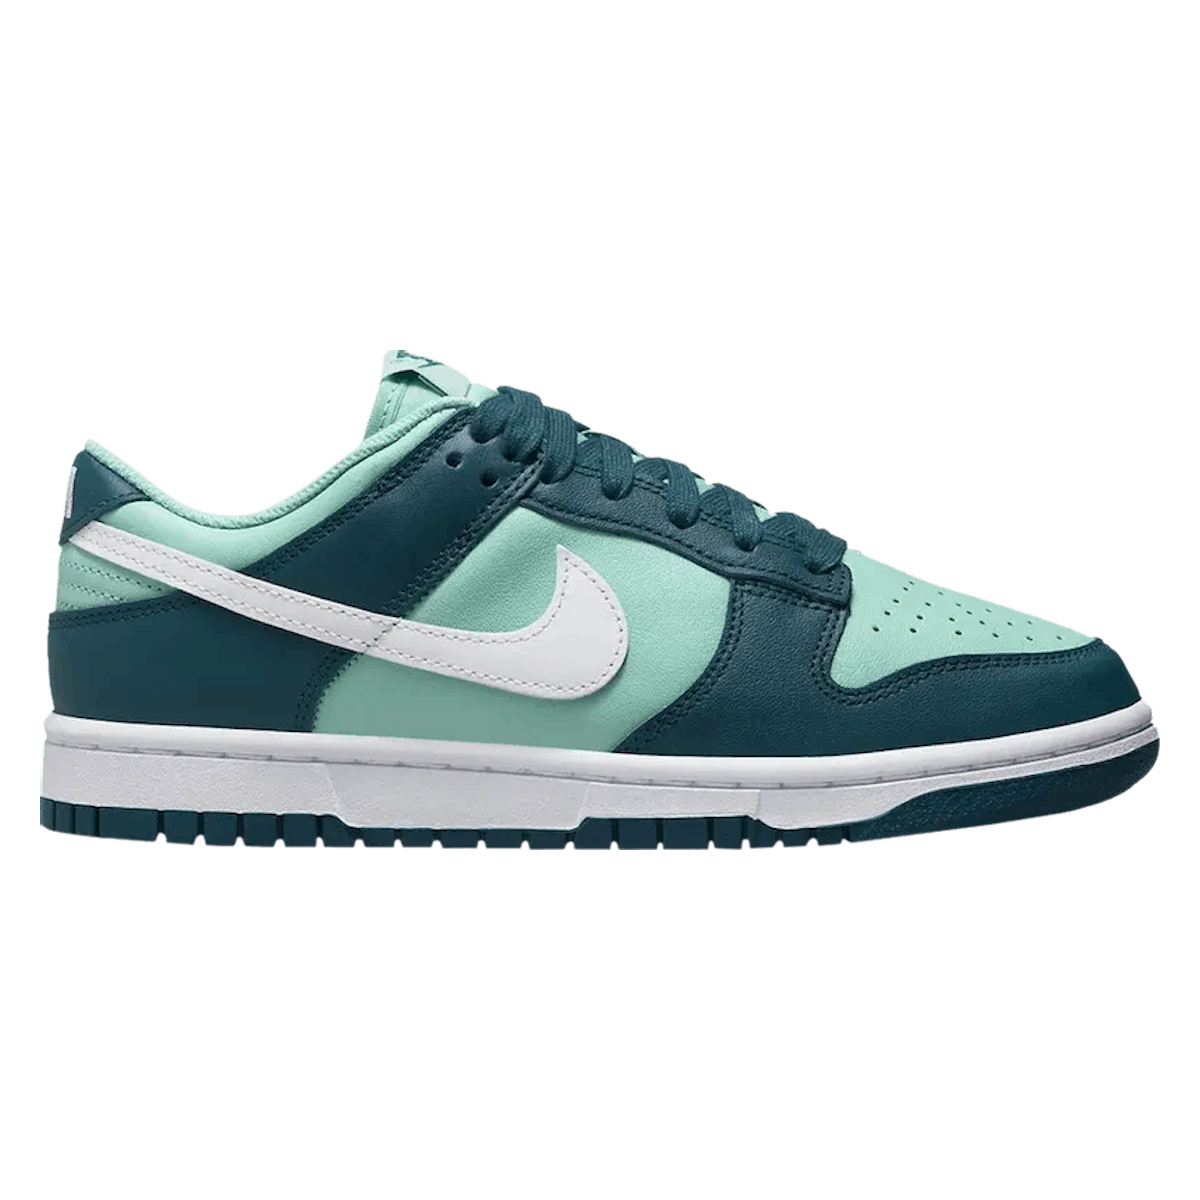 Nike Dunk Low Wmns "Geode Teal"